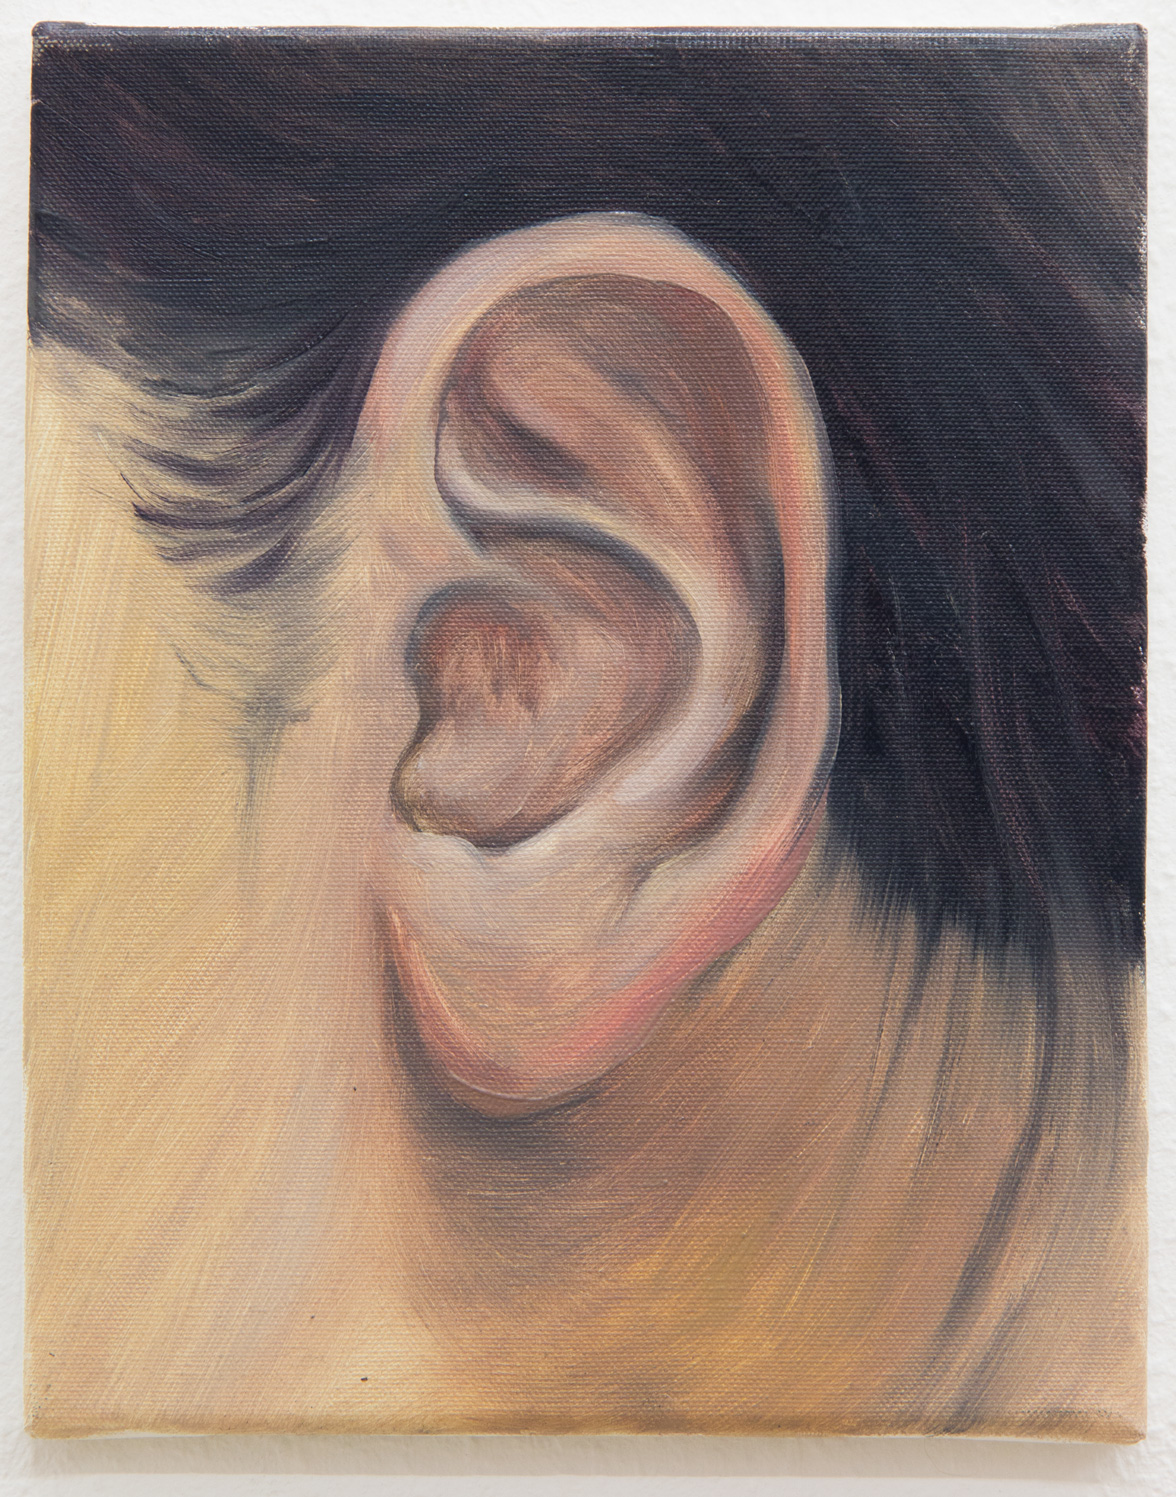 From the "Ear Collection"; 24 x 30 cm; oil on canvas; 2017